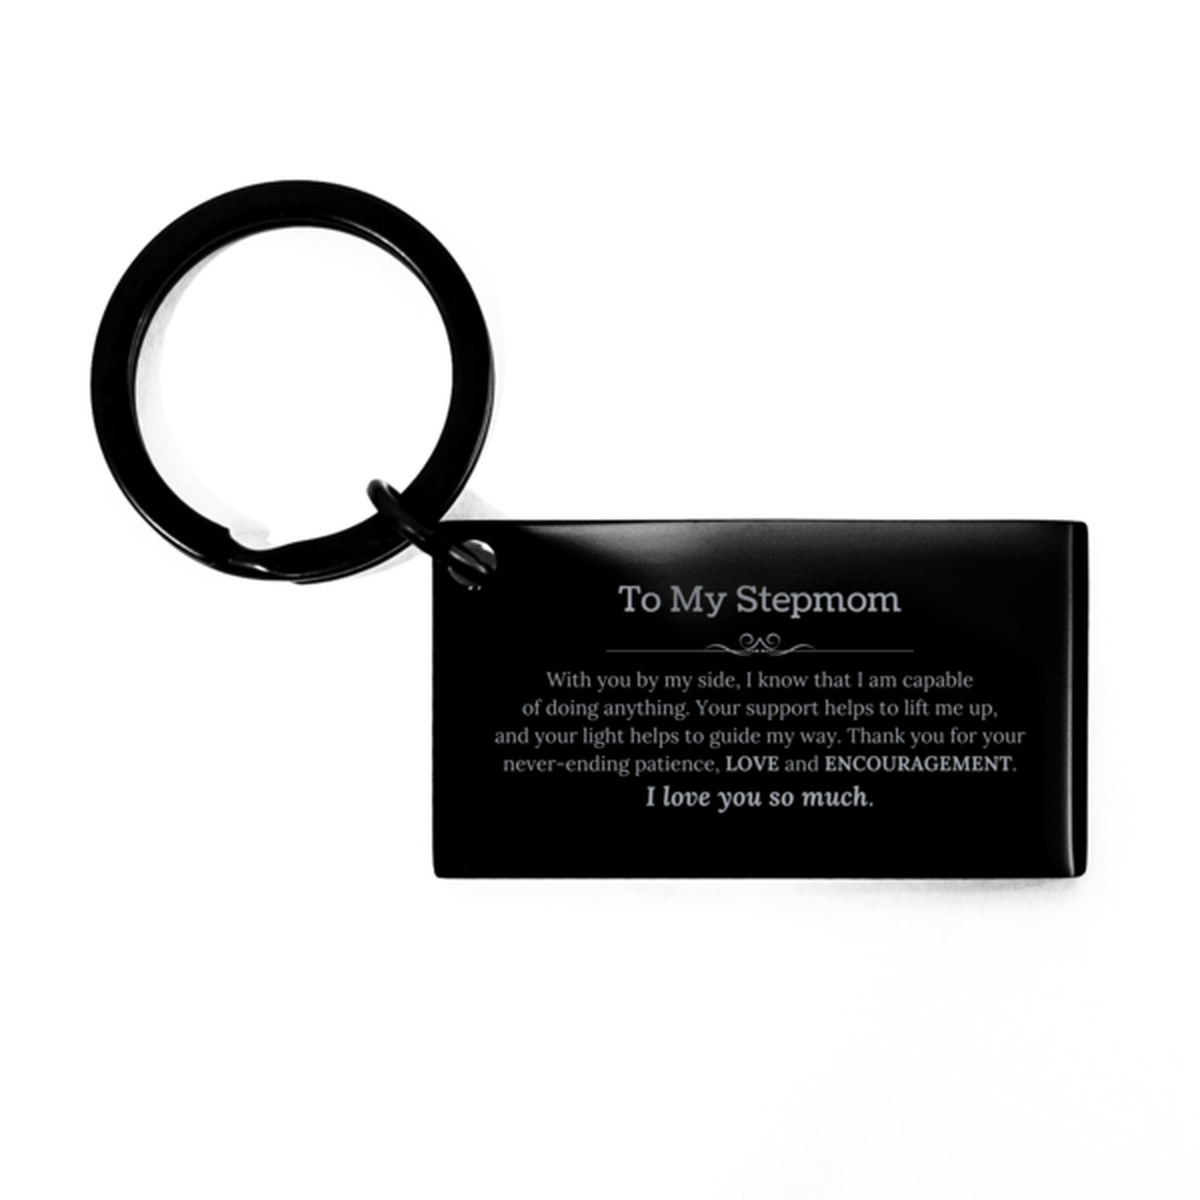 Appreciation Stepmom Keychain Gifts, To My Stepmom Birthday Christmas Wedding Keepsake Gifts for Stepmom With you by my side, I know that I am capable of doing anything. I love you so much